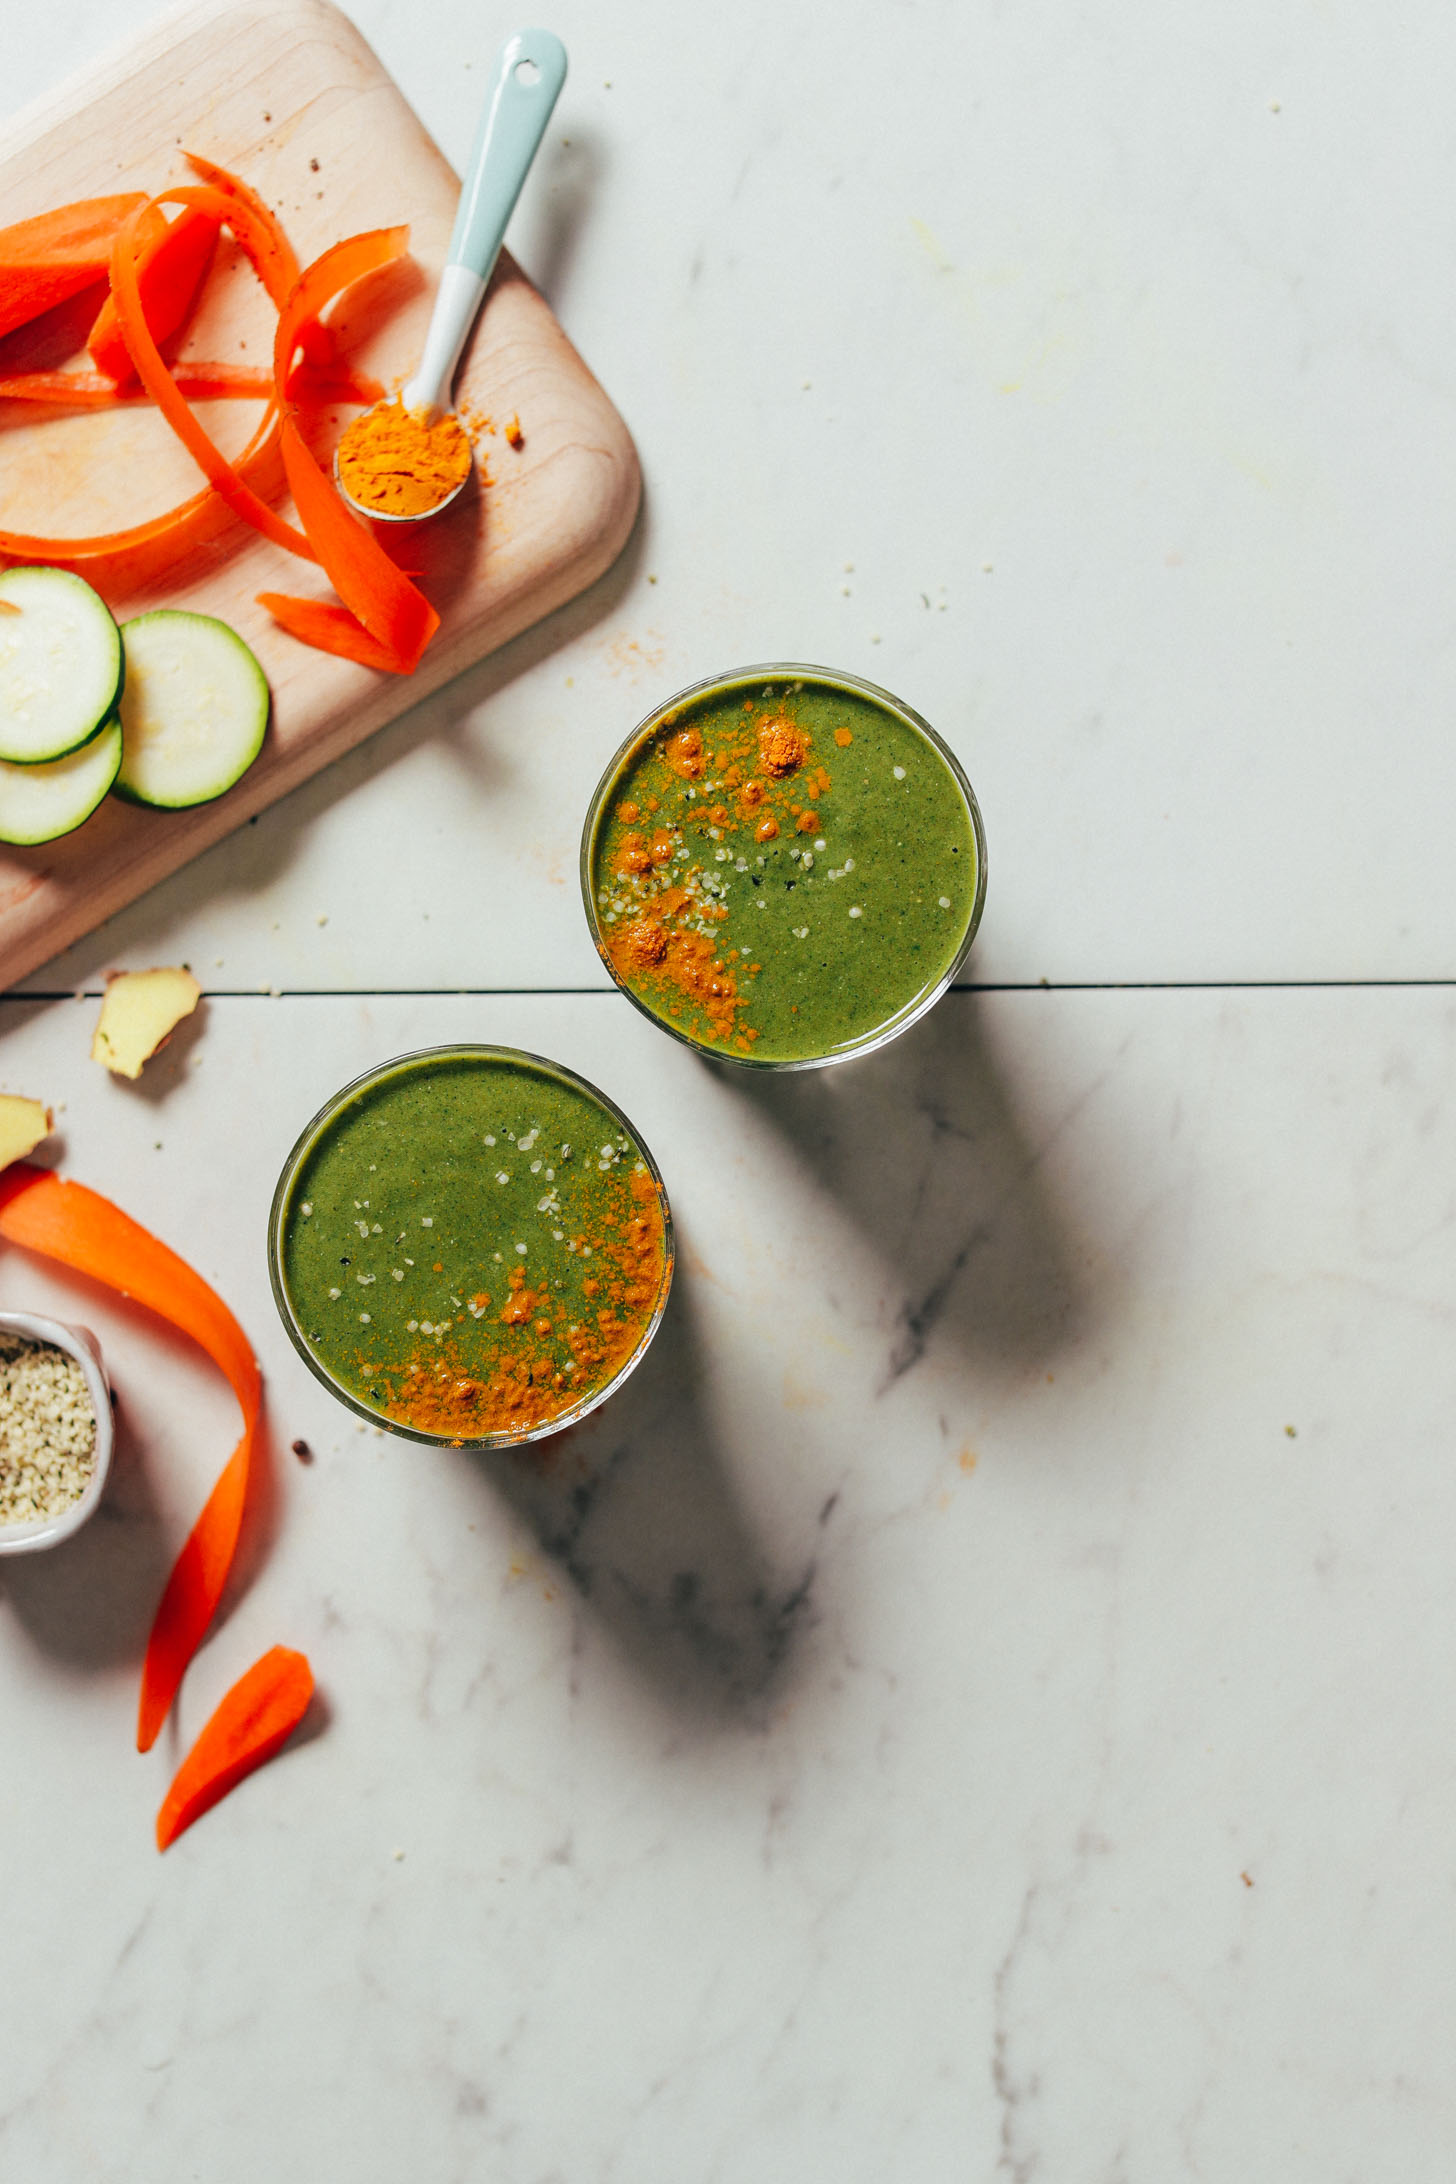 Overhead image of warming winter green smoothie garnished with hemp seeds and turmeric, and carrot, zucchini, and spoonful of turmeric on the side